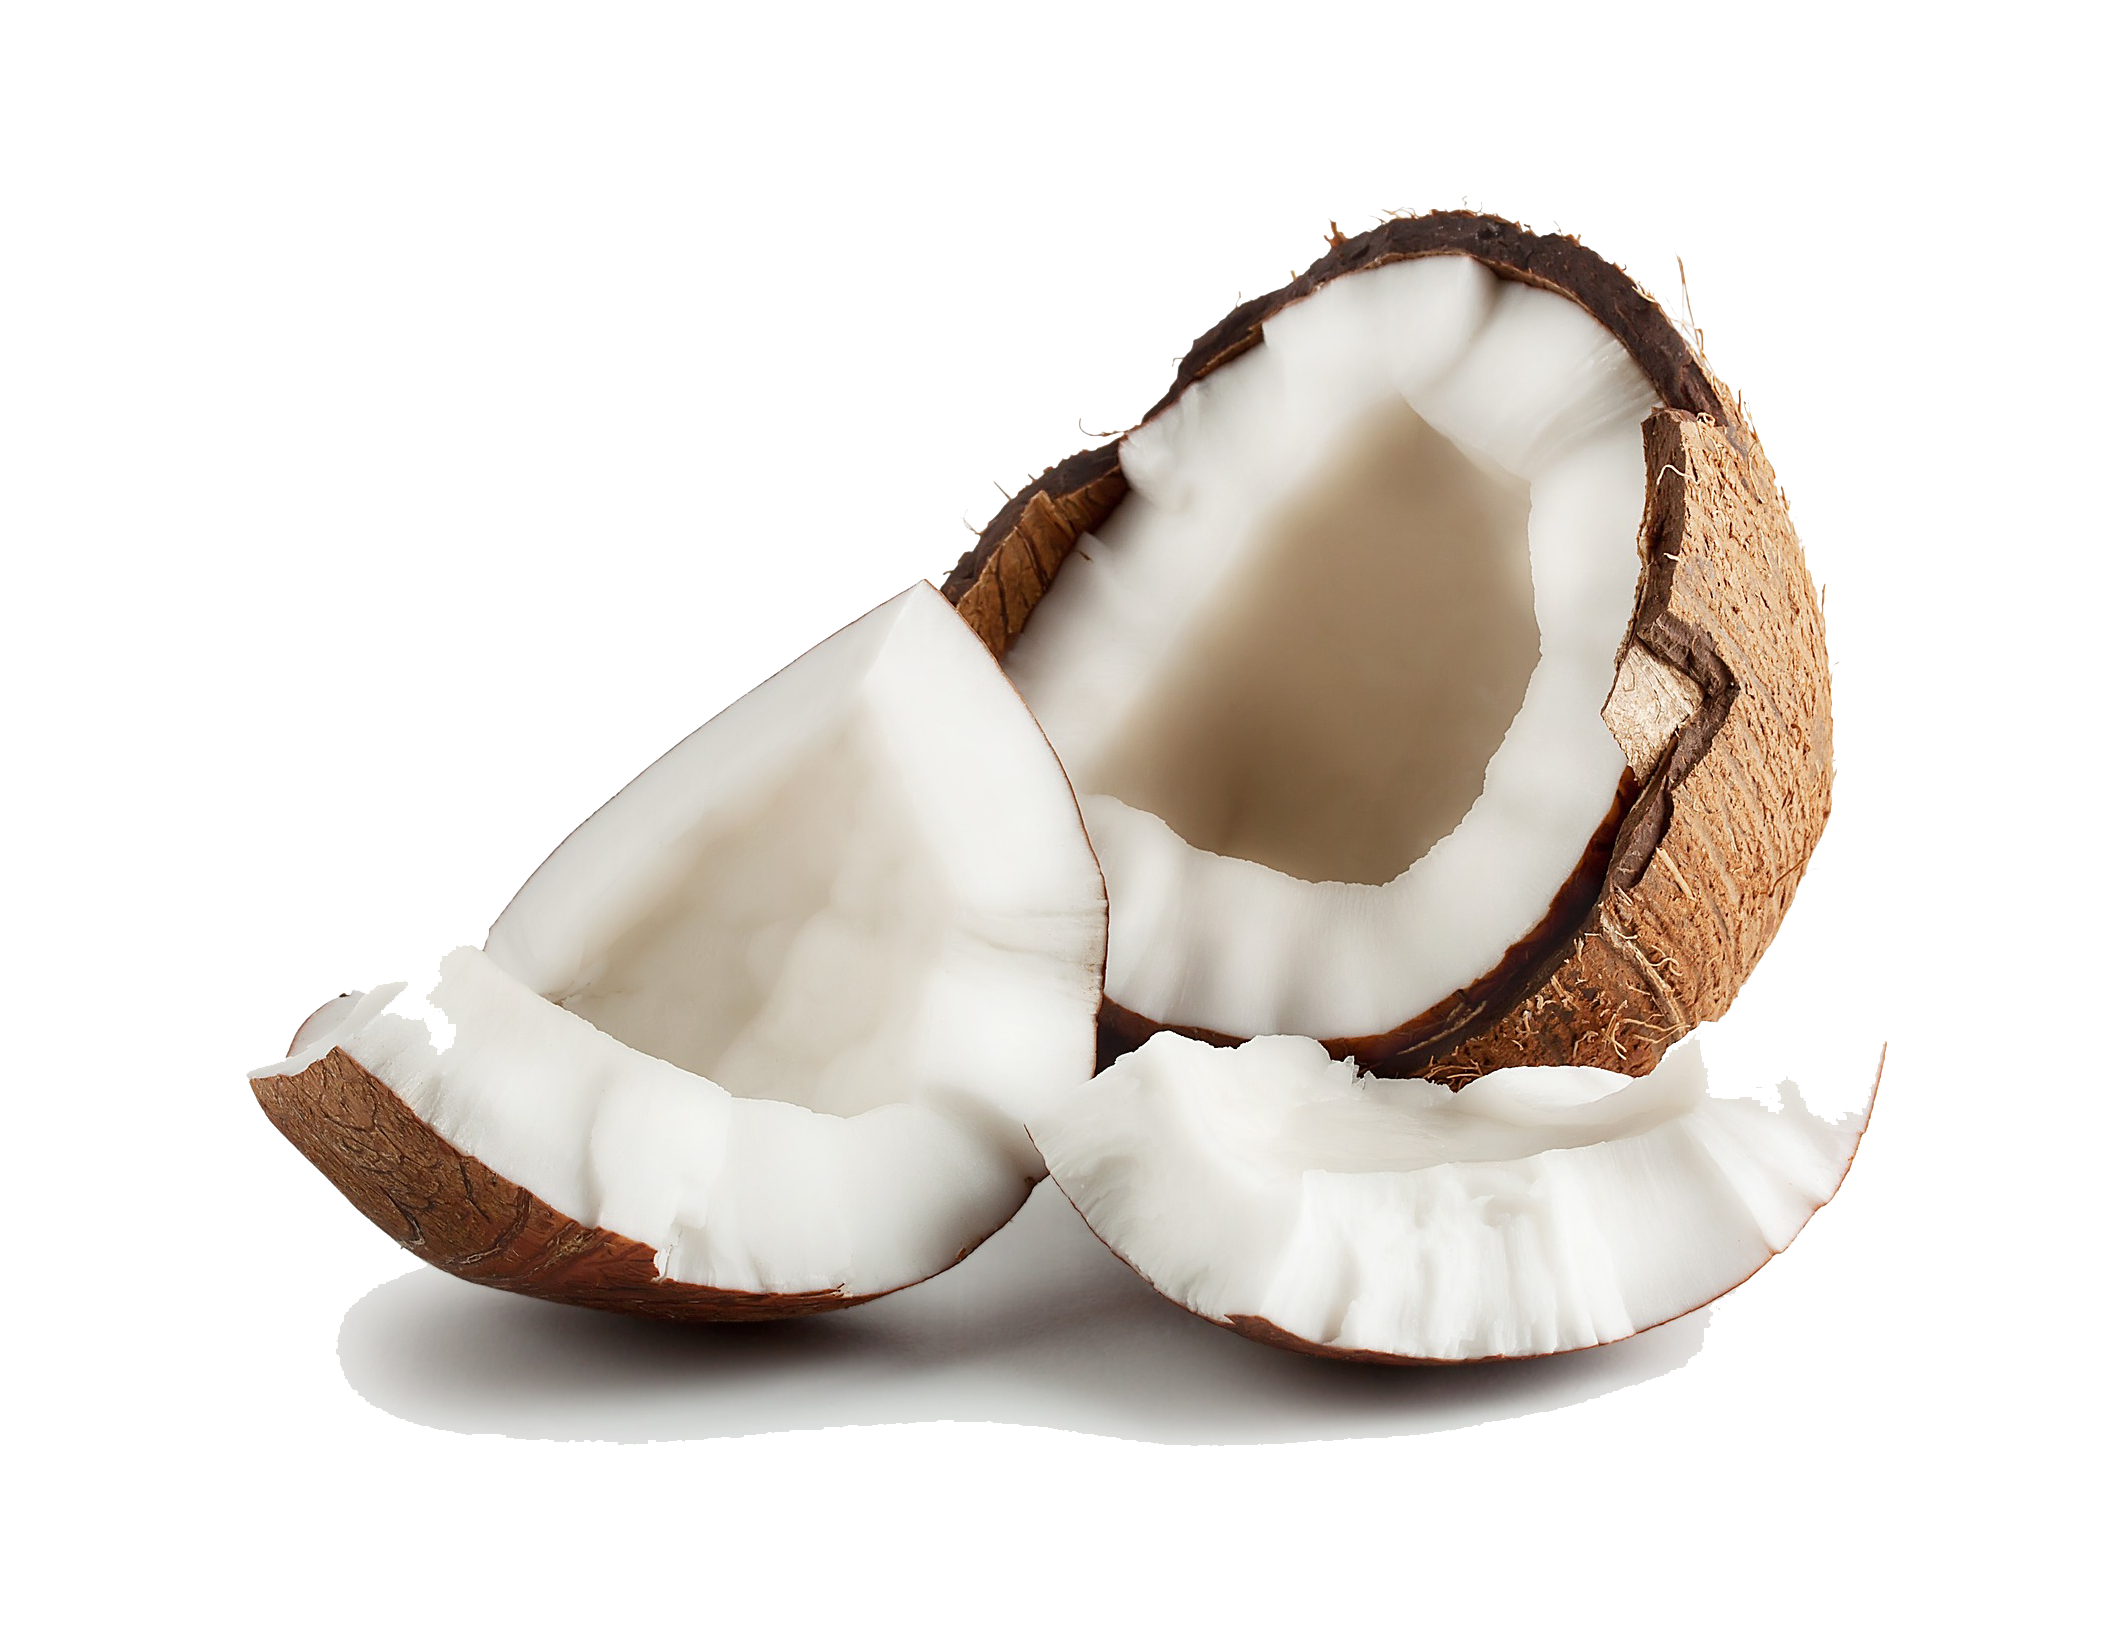 Coconut PNG Image in Transparent - Coconut Png